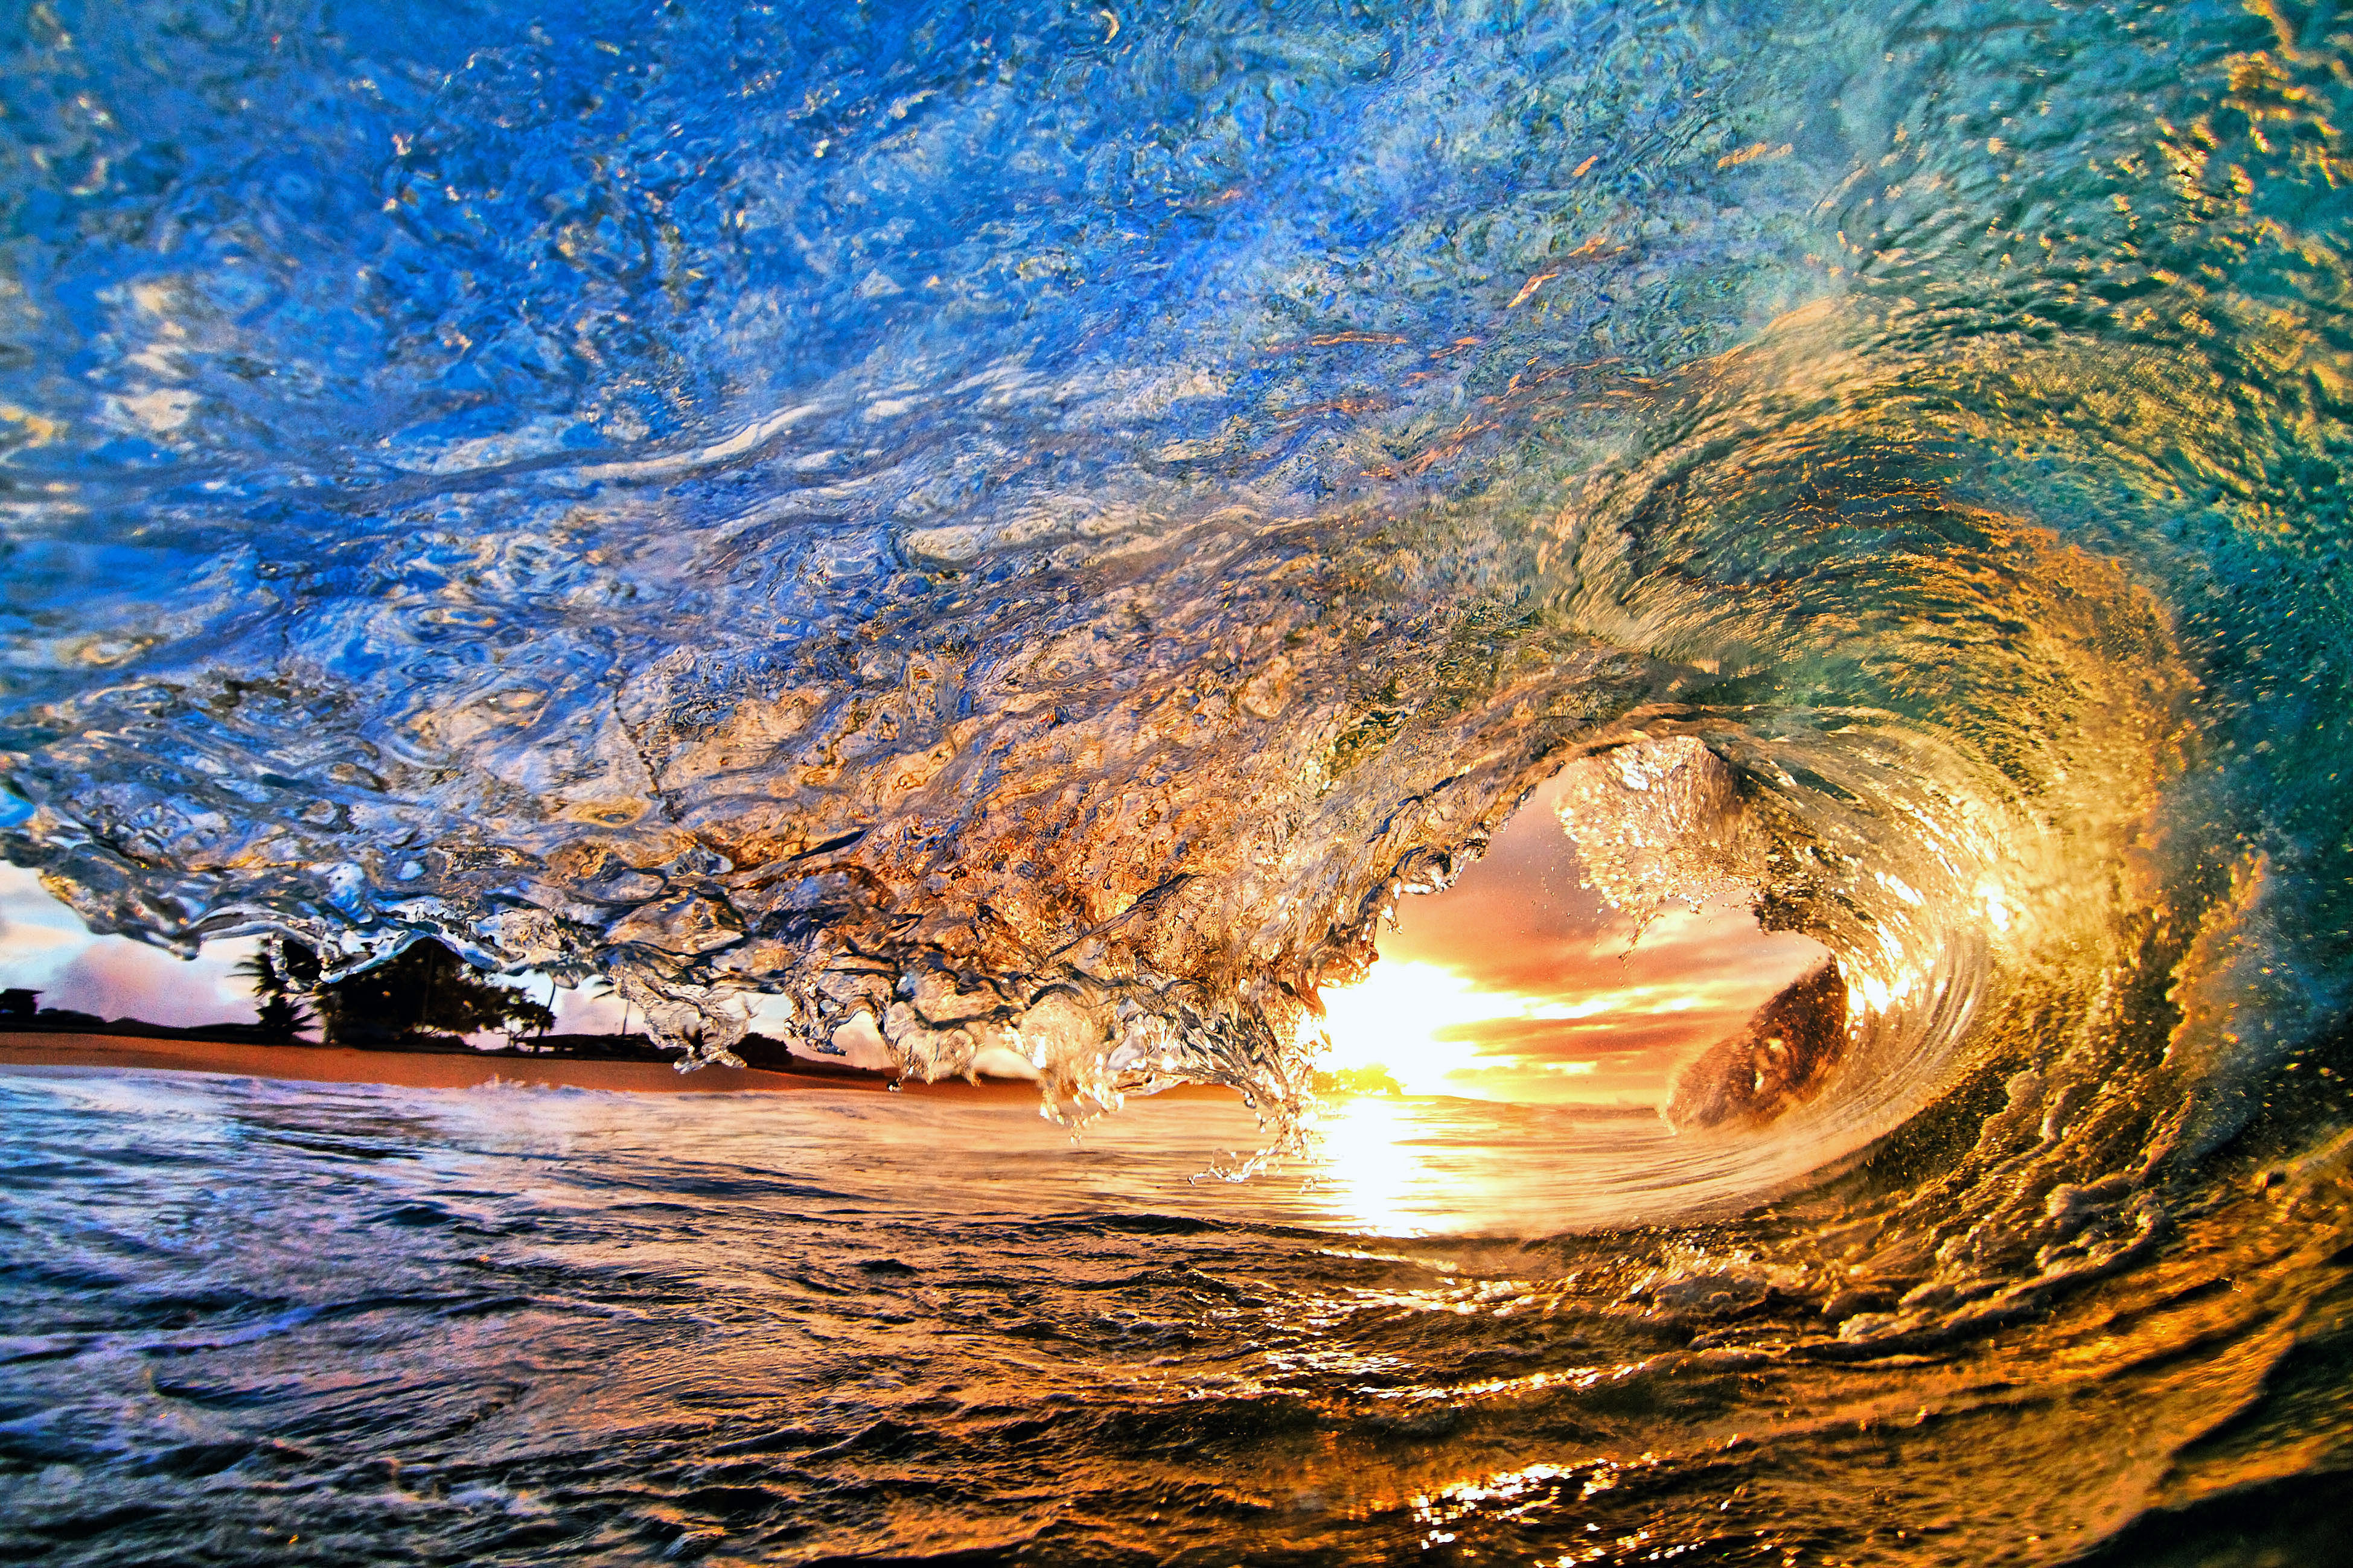 The sun inside the wave wallpapers and images - wallpapers, pictures ...